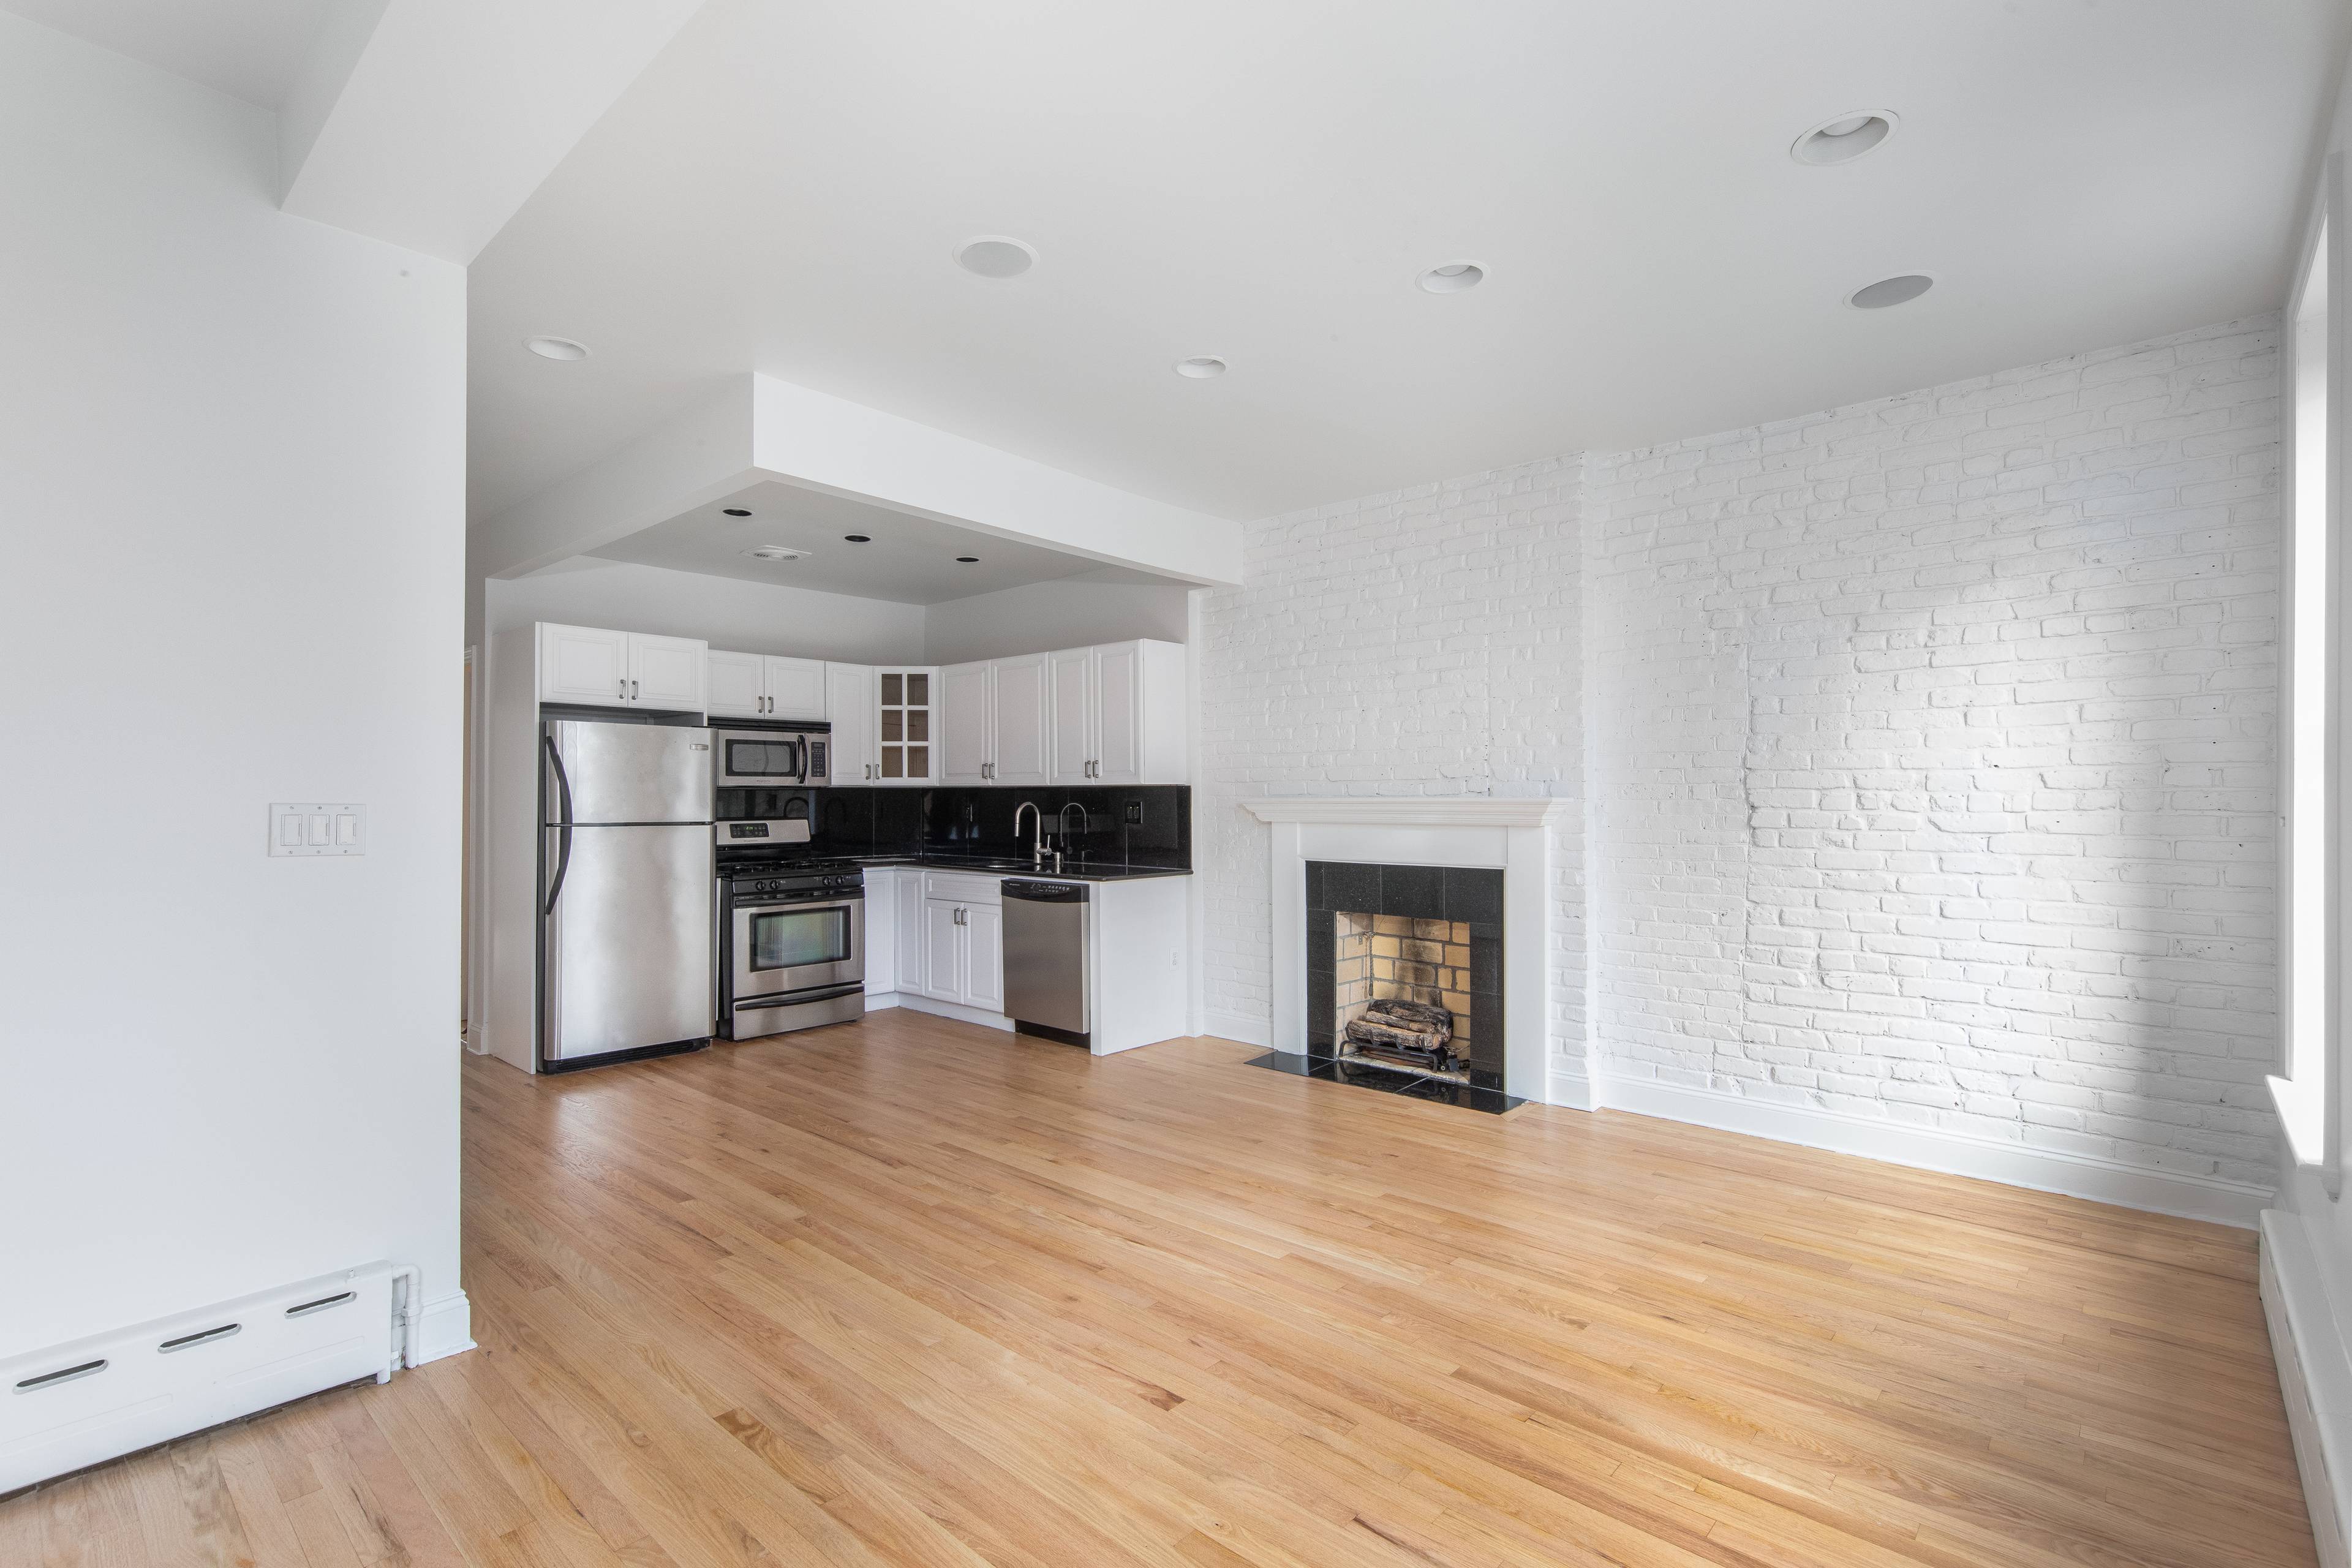 Don't miss this rare opportunity to own a floor through unit in a historically zoned Brownstone, located on one of the most premier blocks in Stuyvesant Heights.